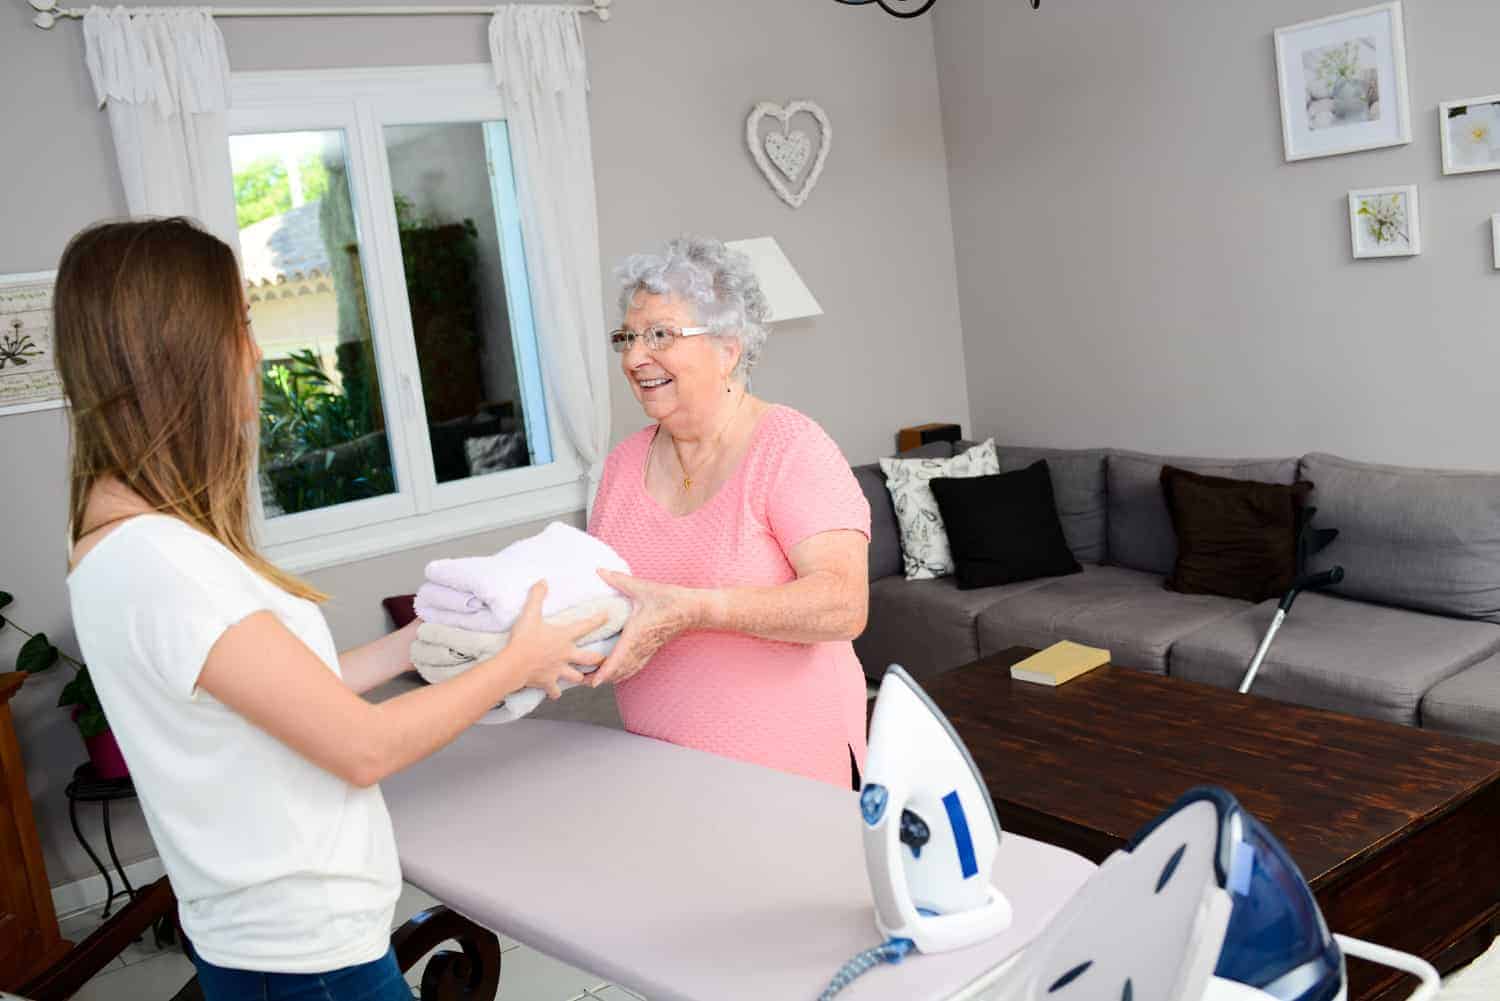 A smiling elderly woman receives a stack of freshly folded towels from a carer in a homey living room, with an ironing board and iron in the foreground